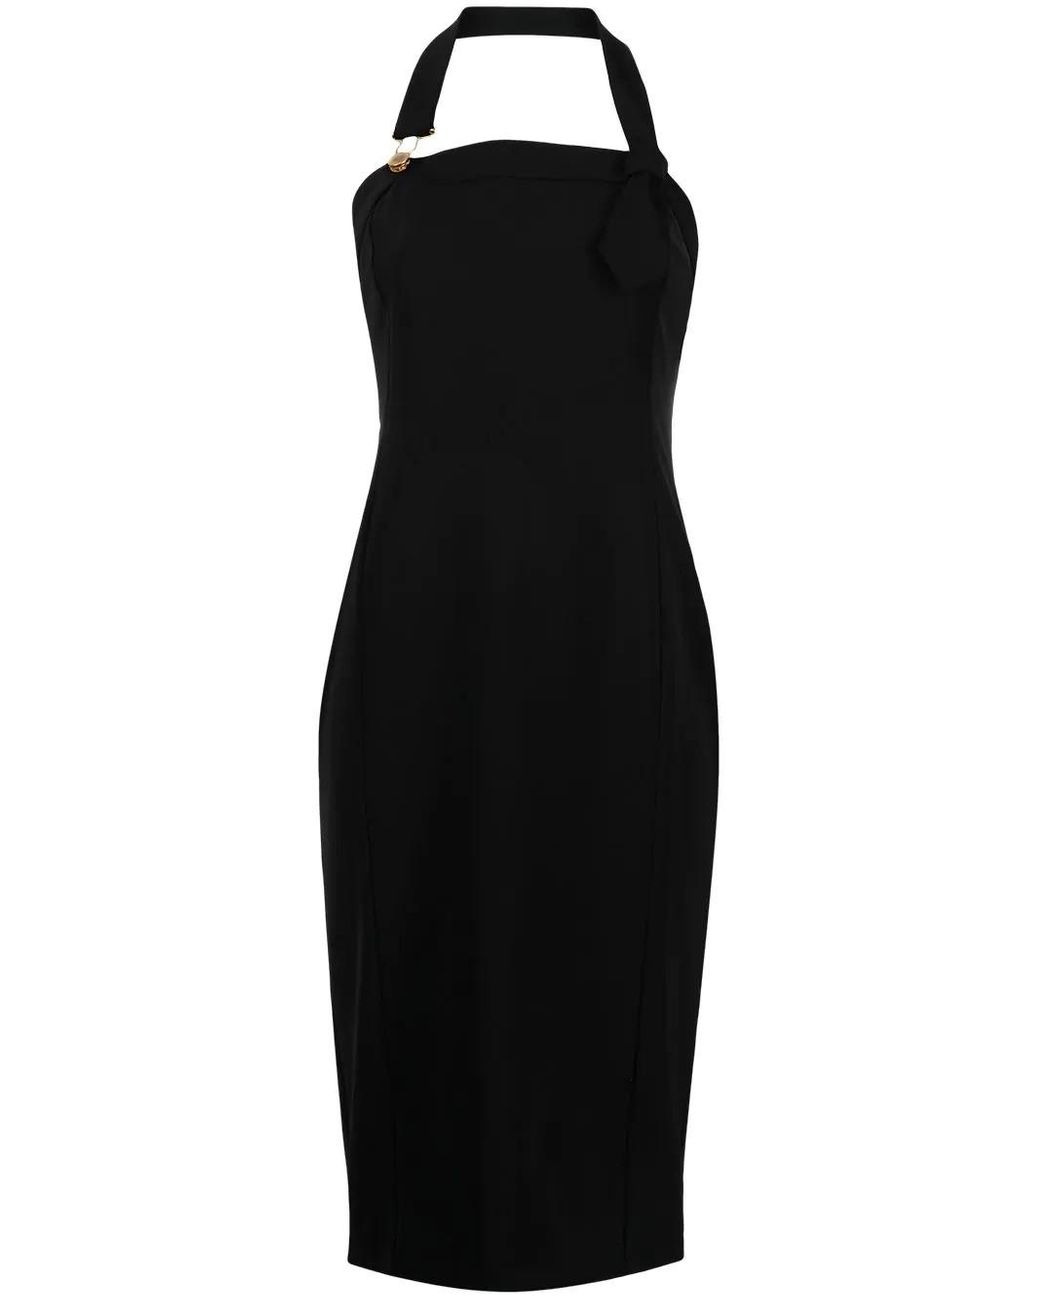 Boutique Moschino Synthetic Halterneck Dress in Black - Lyst